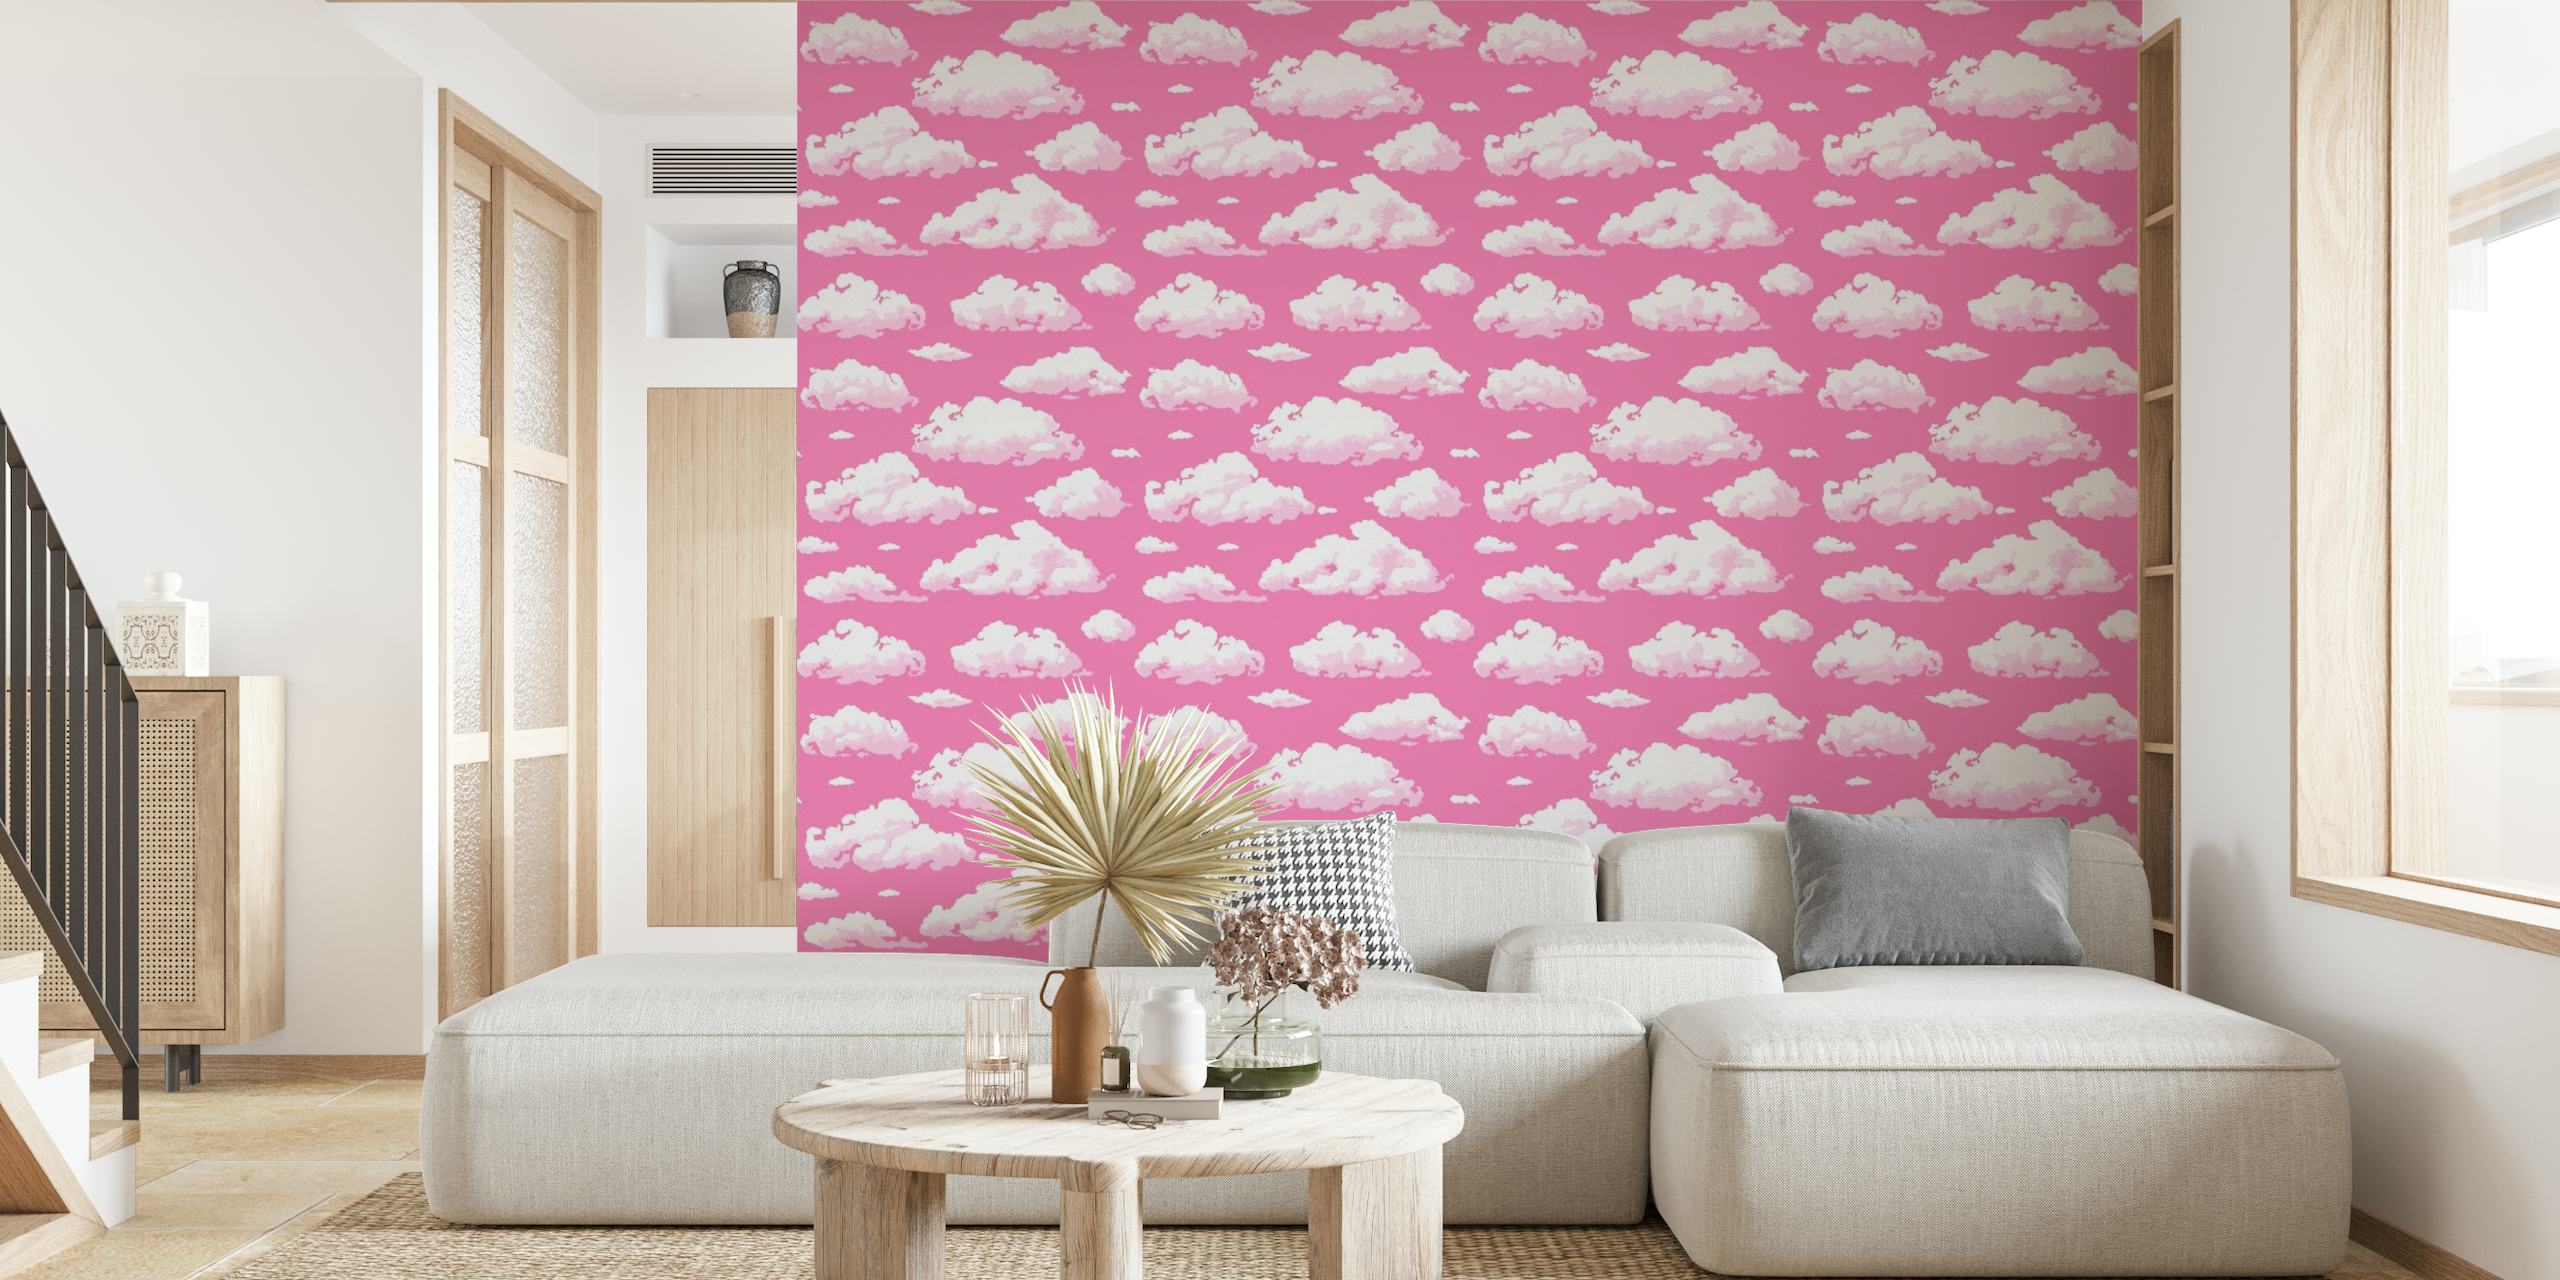 Cloudy sky on pink tapete